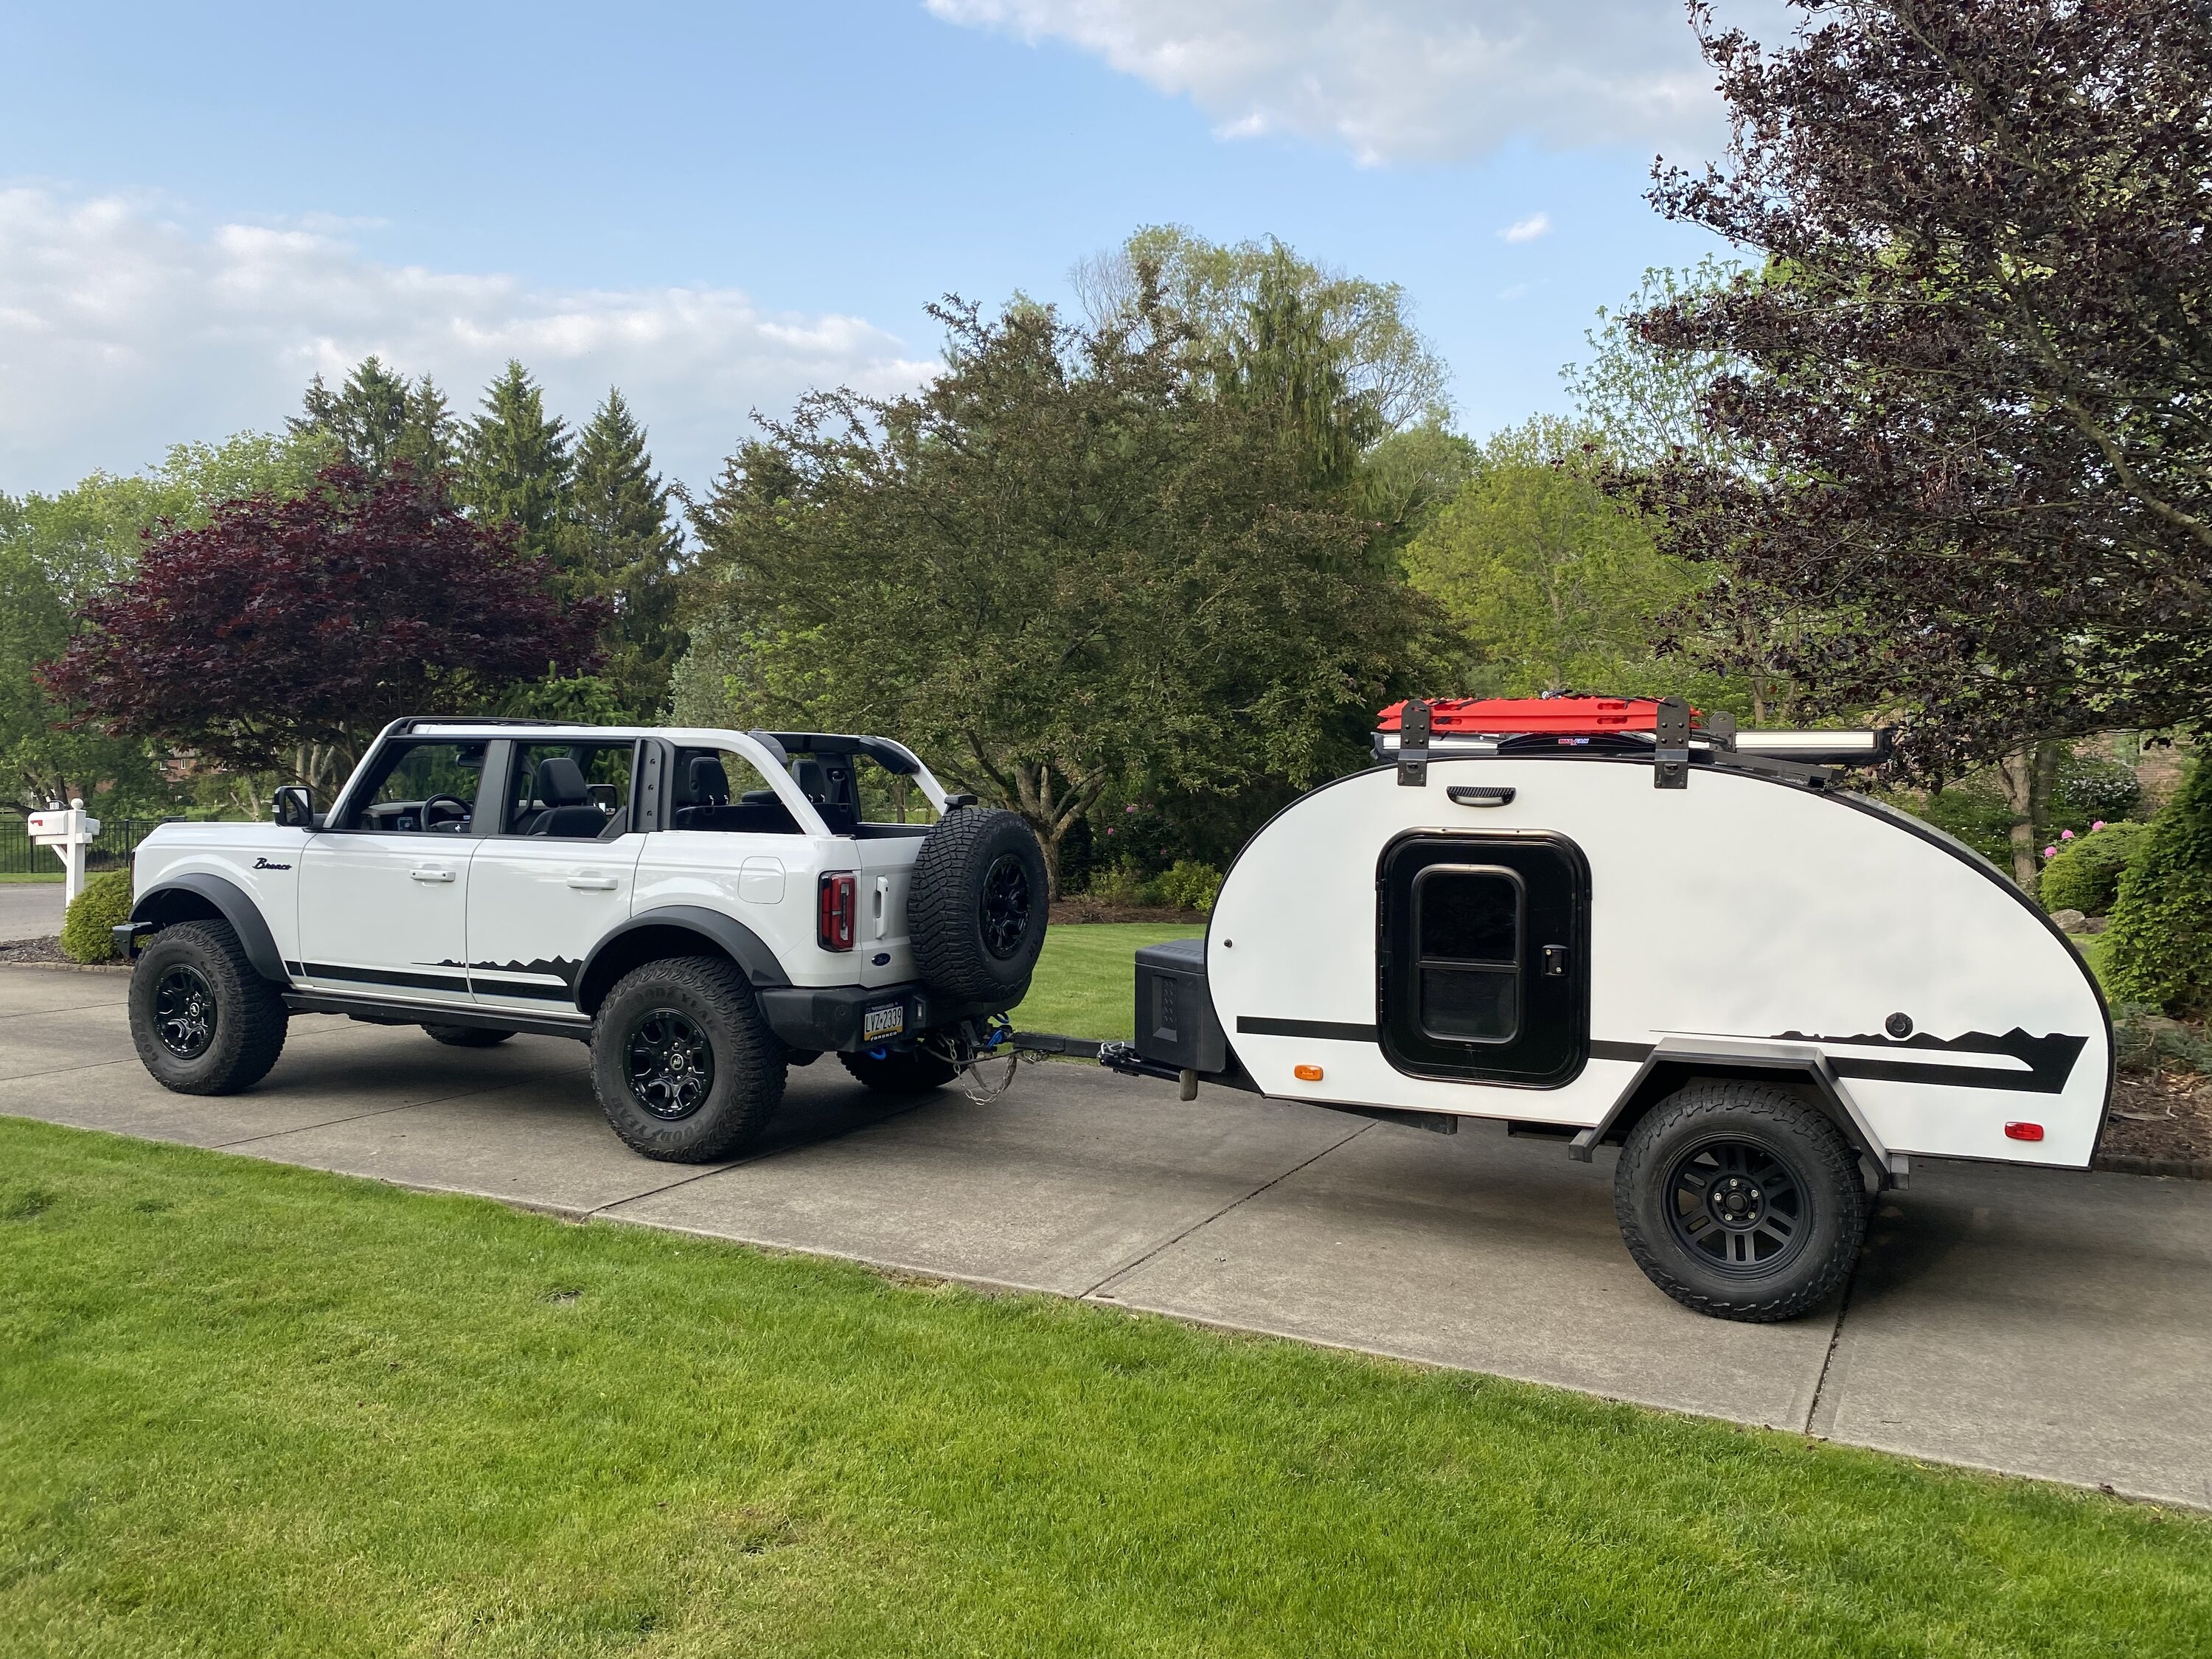 Ford Bronco Bronco Boondockers! Show your rig, camper, roof top tent RTT 🏕️ IMG_2587